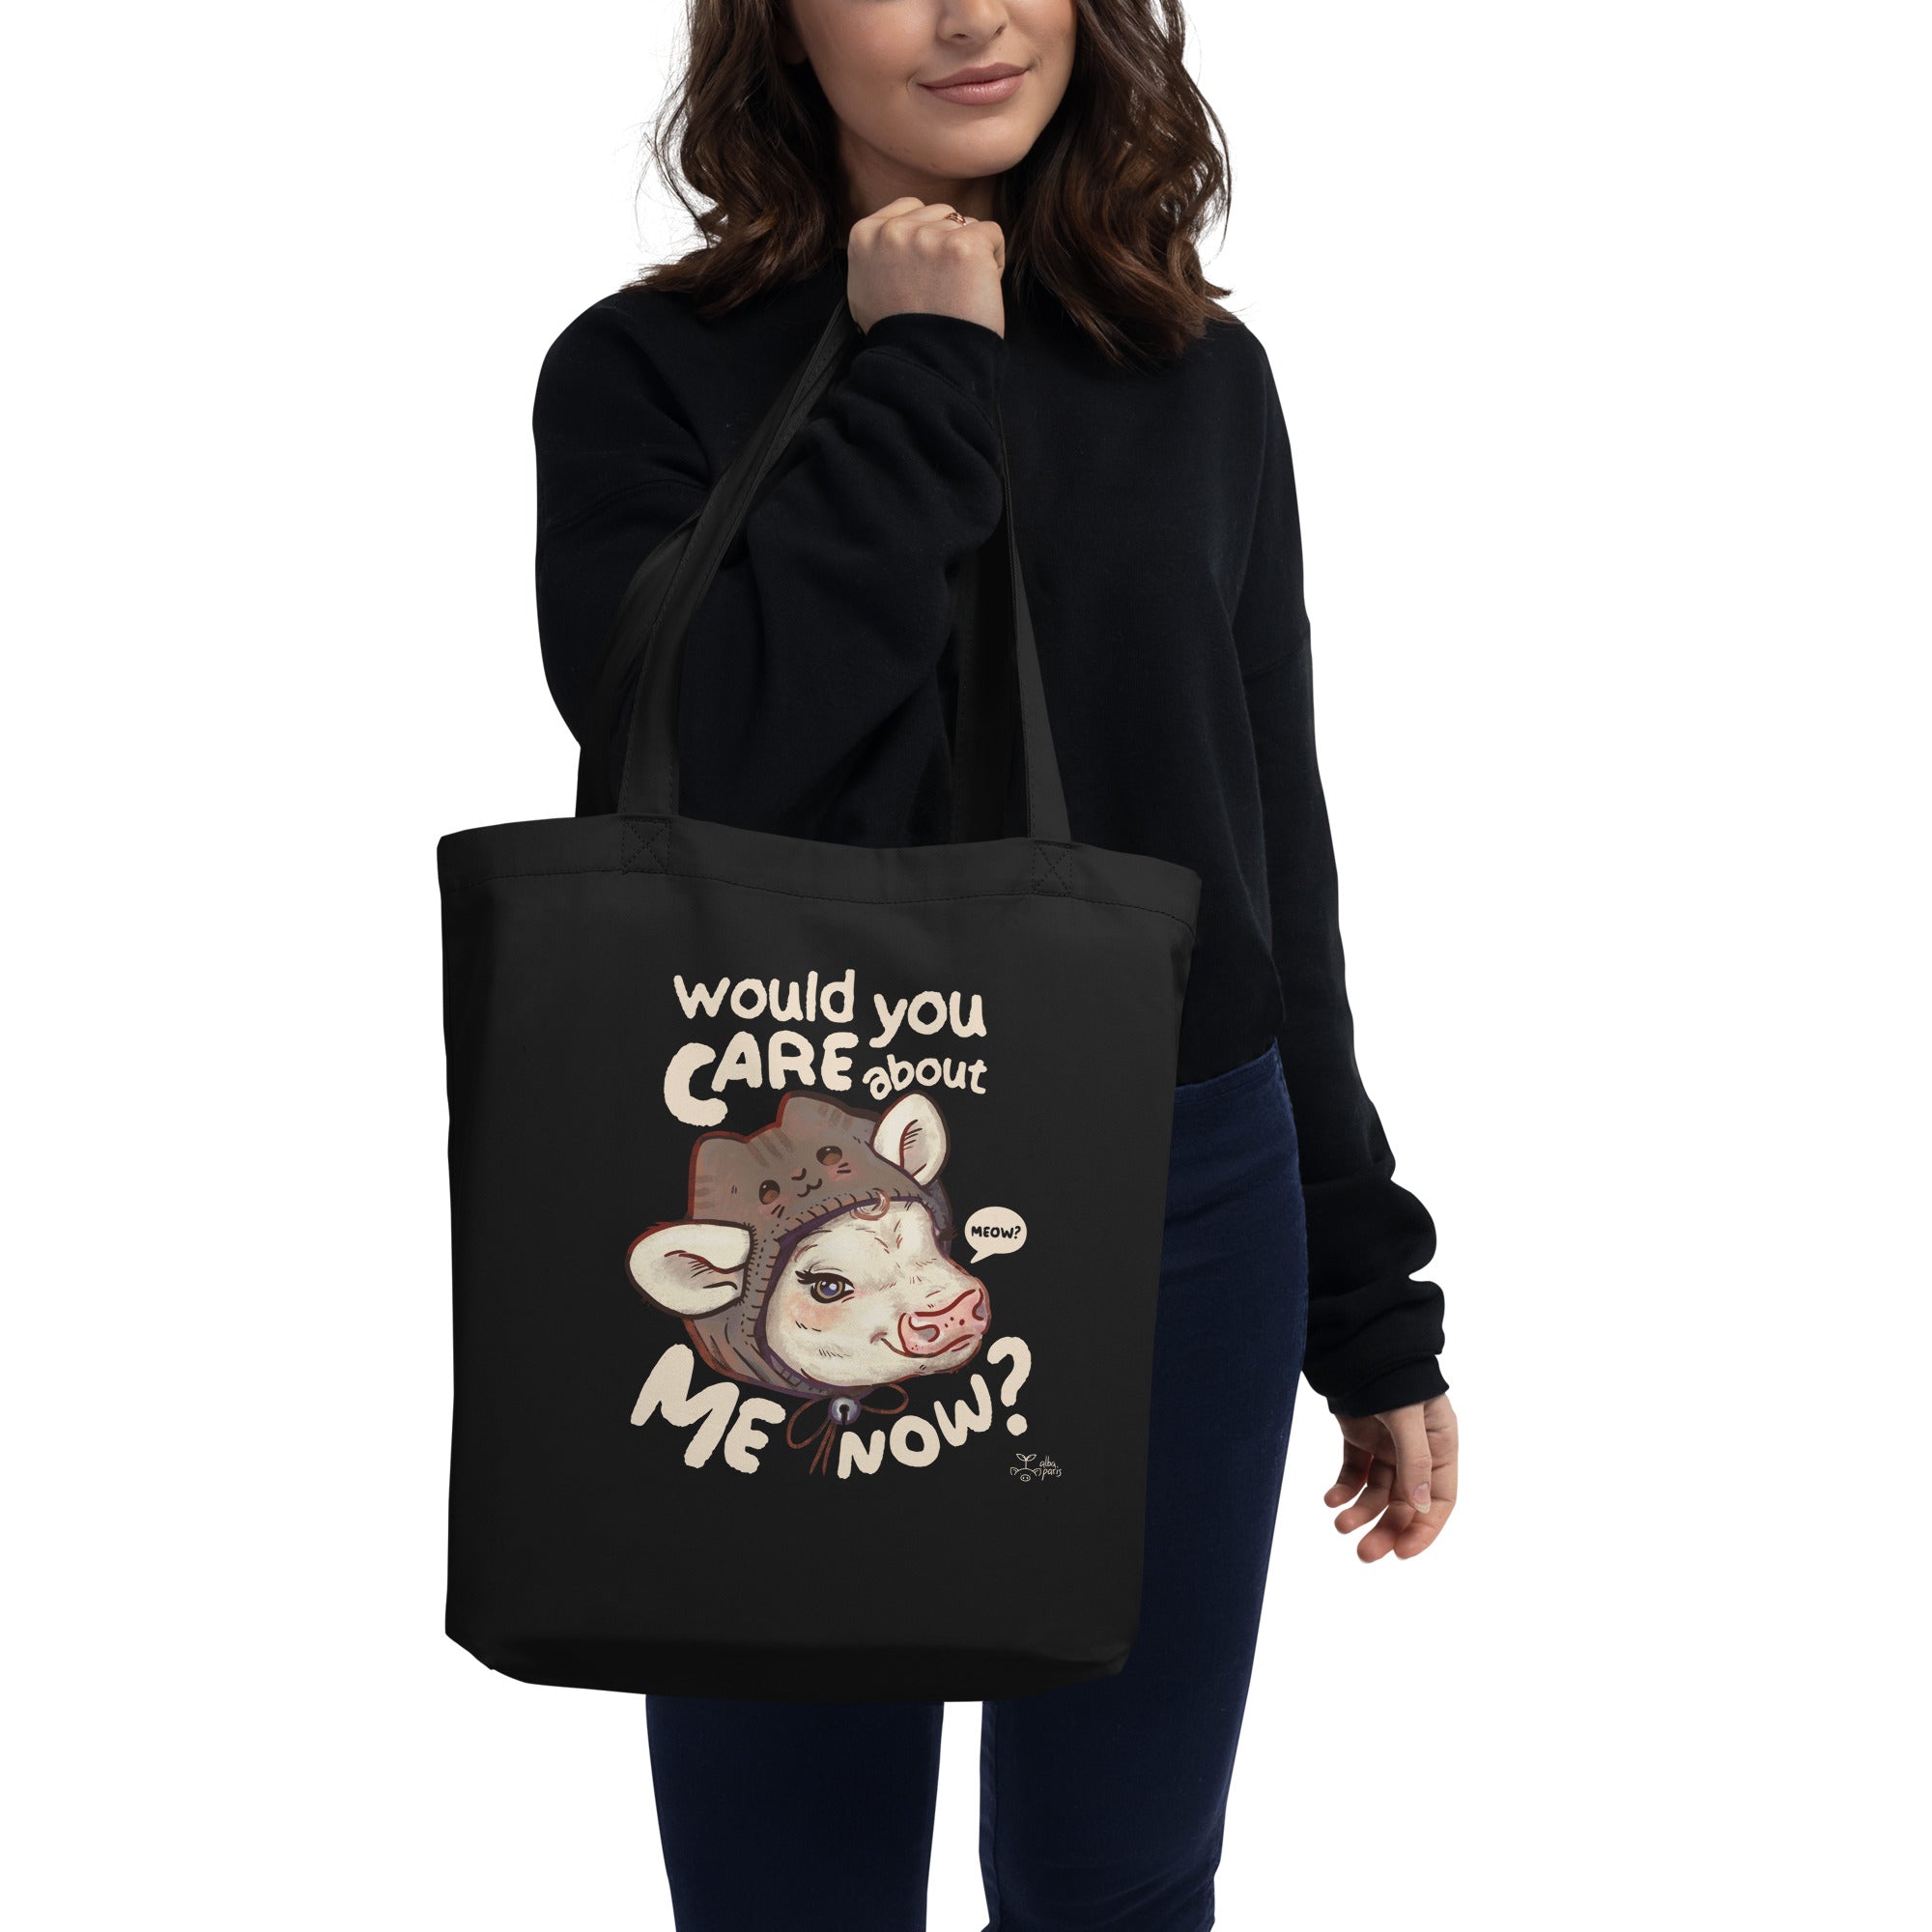 Would You Care About Me Now? Cow Organic Shopping Bag